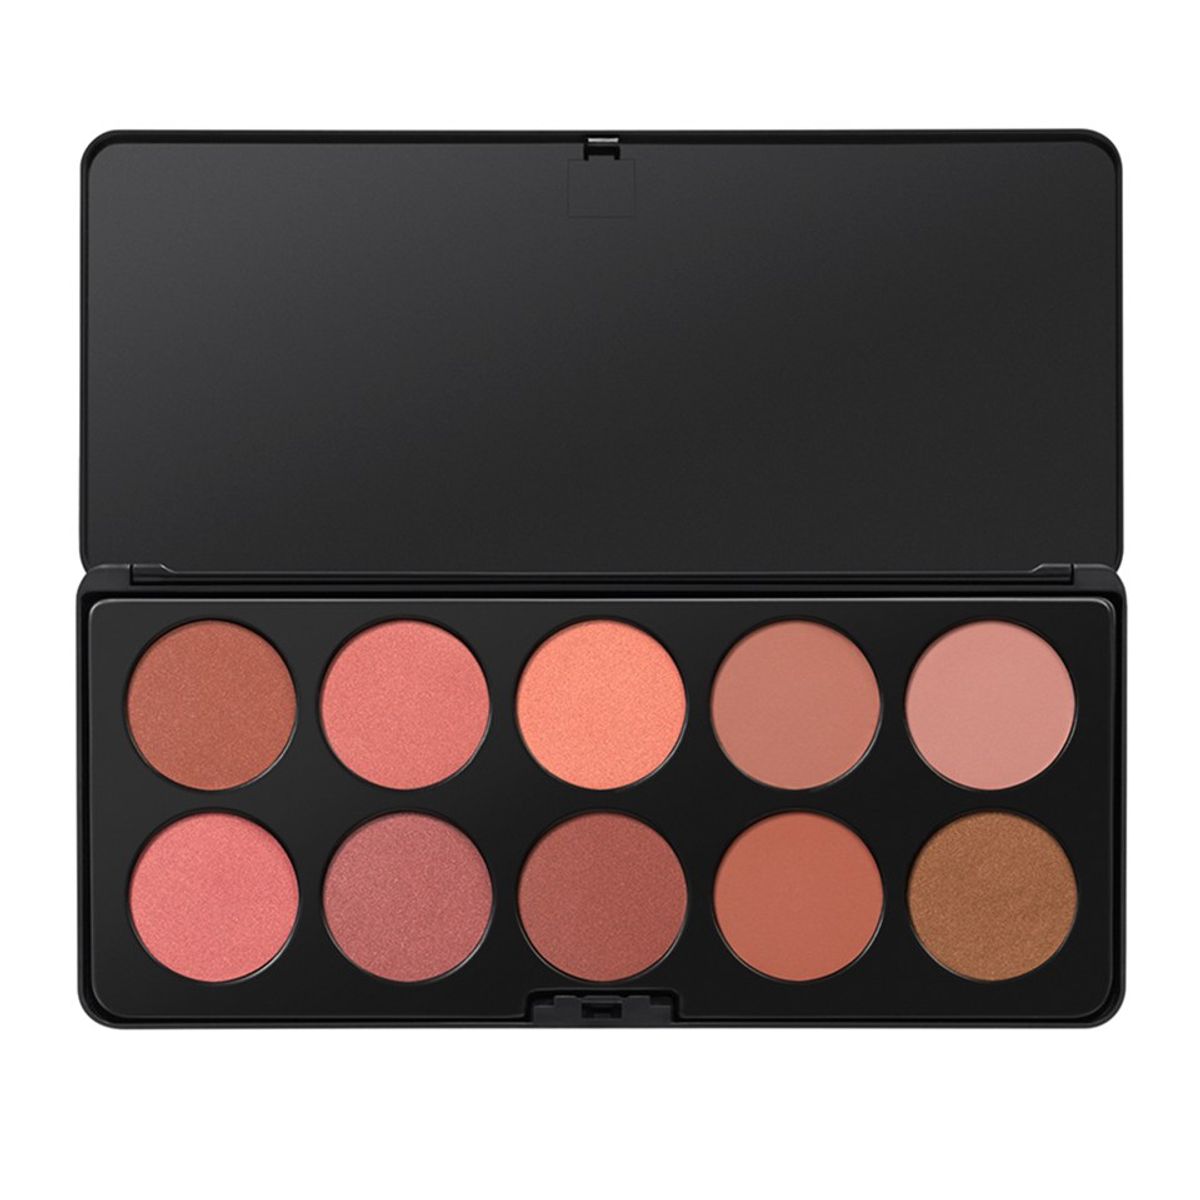 10 Makeup Palettes Every Girl Needs In Her Life